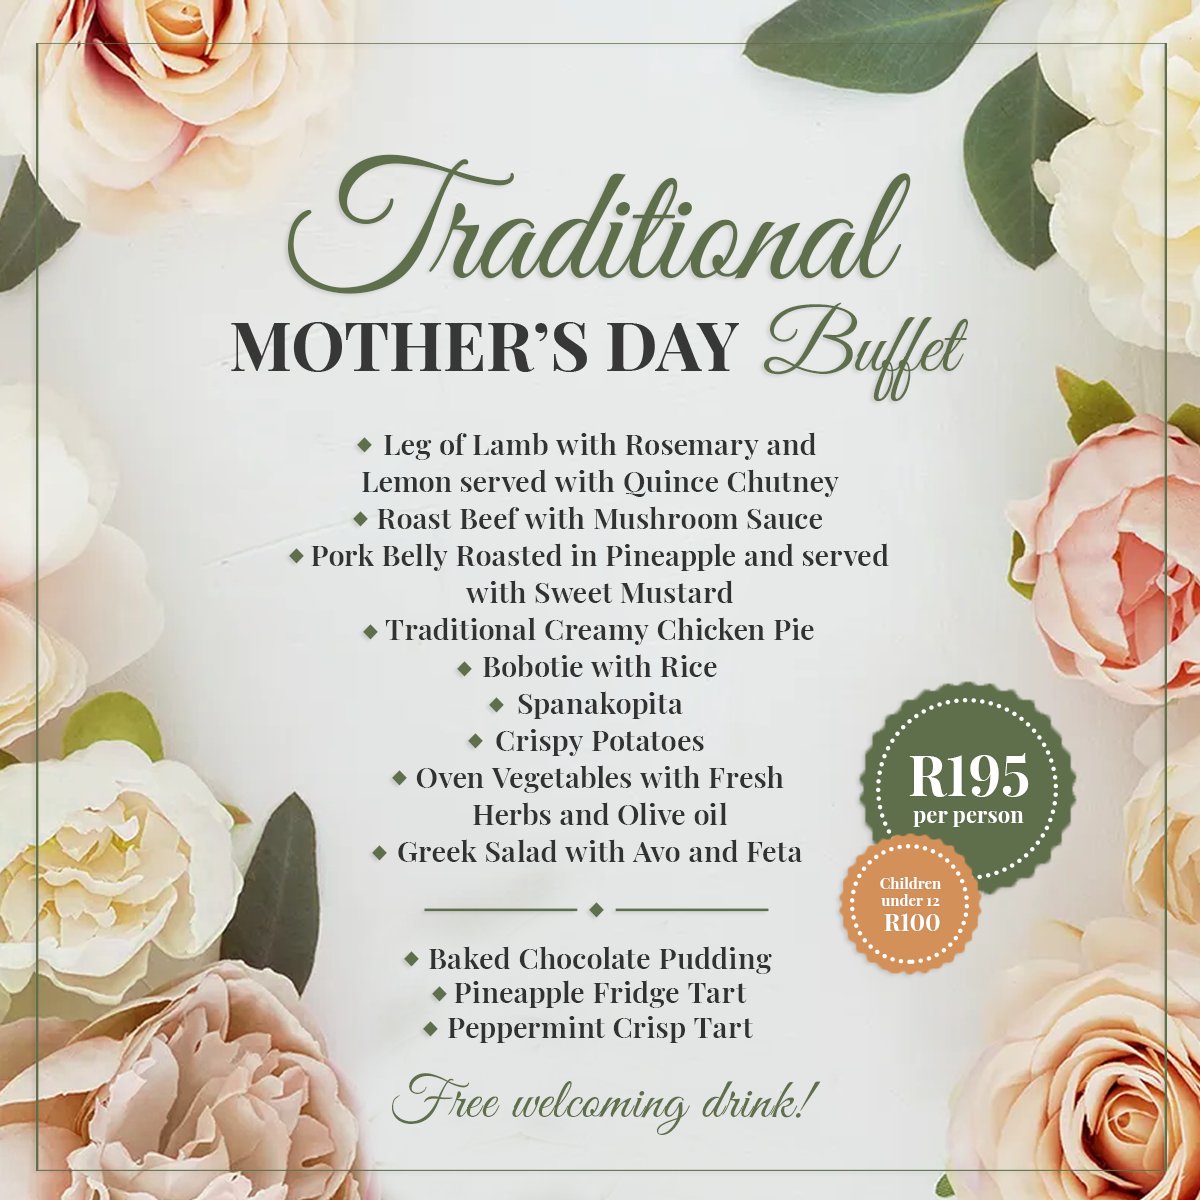 🌷💫 Treat Mom to a #𝑺𝒑𝒆𝒄𝒊𝒂𝒍𝑫𝒂𝒚 at BON COURAGE, Café Maude Restaurant! 💫🌷 Join us on Sunday, 12th May for a heartwarming 𝑴𝒐𝒕𝒉𝒆𝒓'𝒔 𝑫𝒂𝒚 Buffet. Indulge in a delicious spread of traditional favourites crafted with love, and enjoy a complimentary welcome d ...